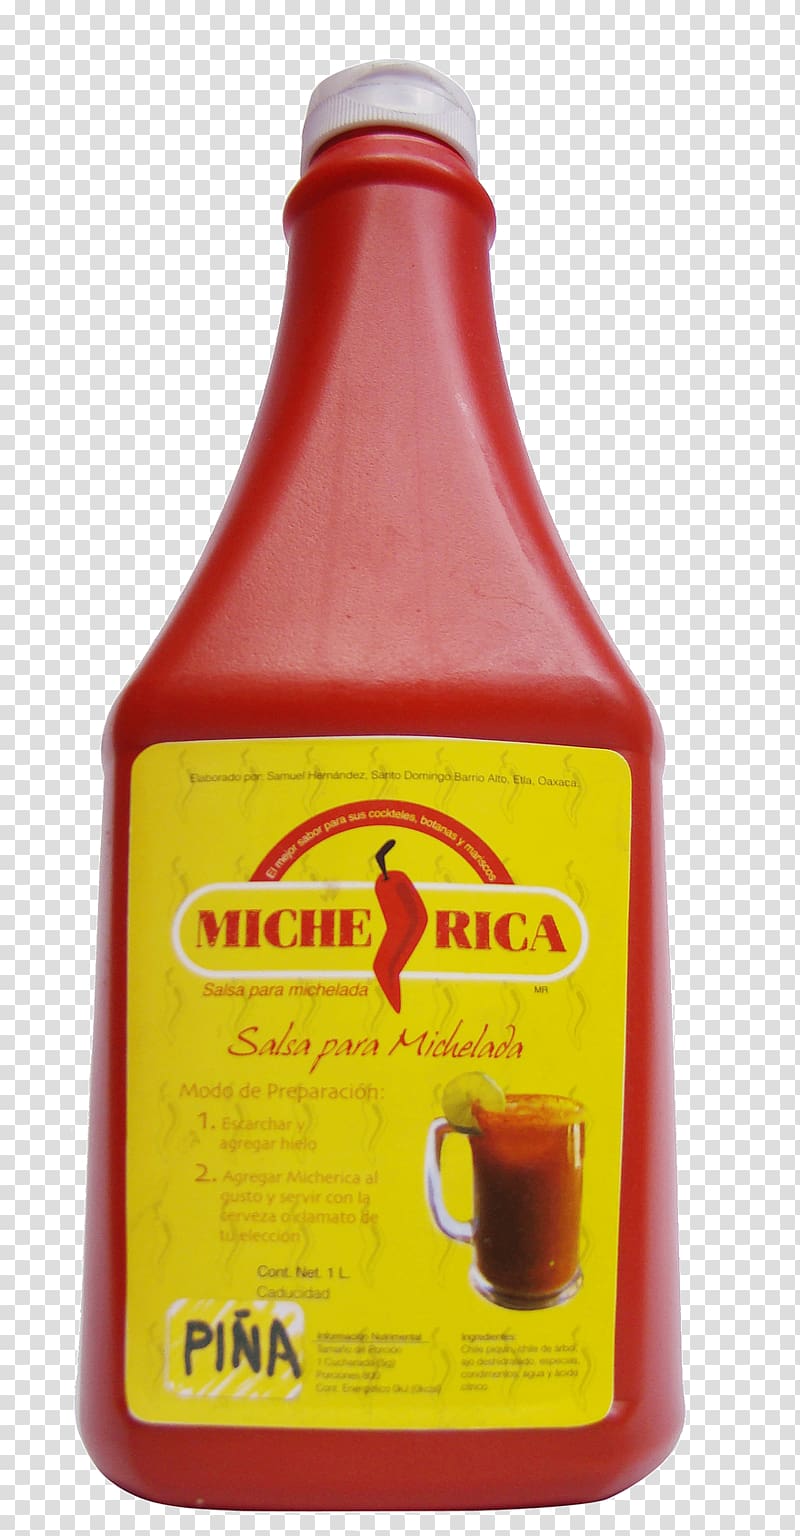 Ketchup Sweet chili sauce Hot Sauce, Micheladas transparent background PNG clipart